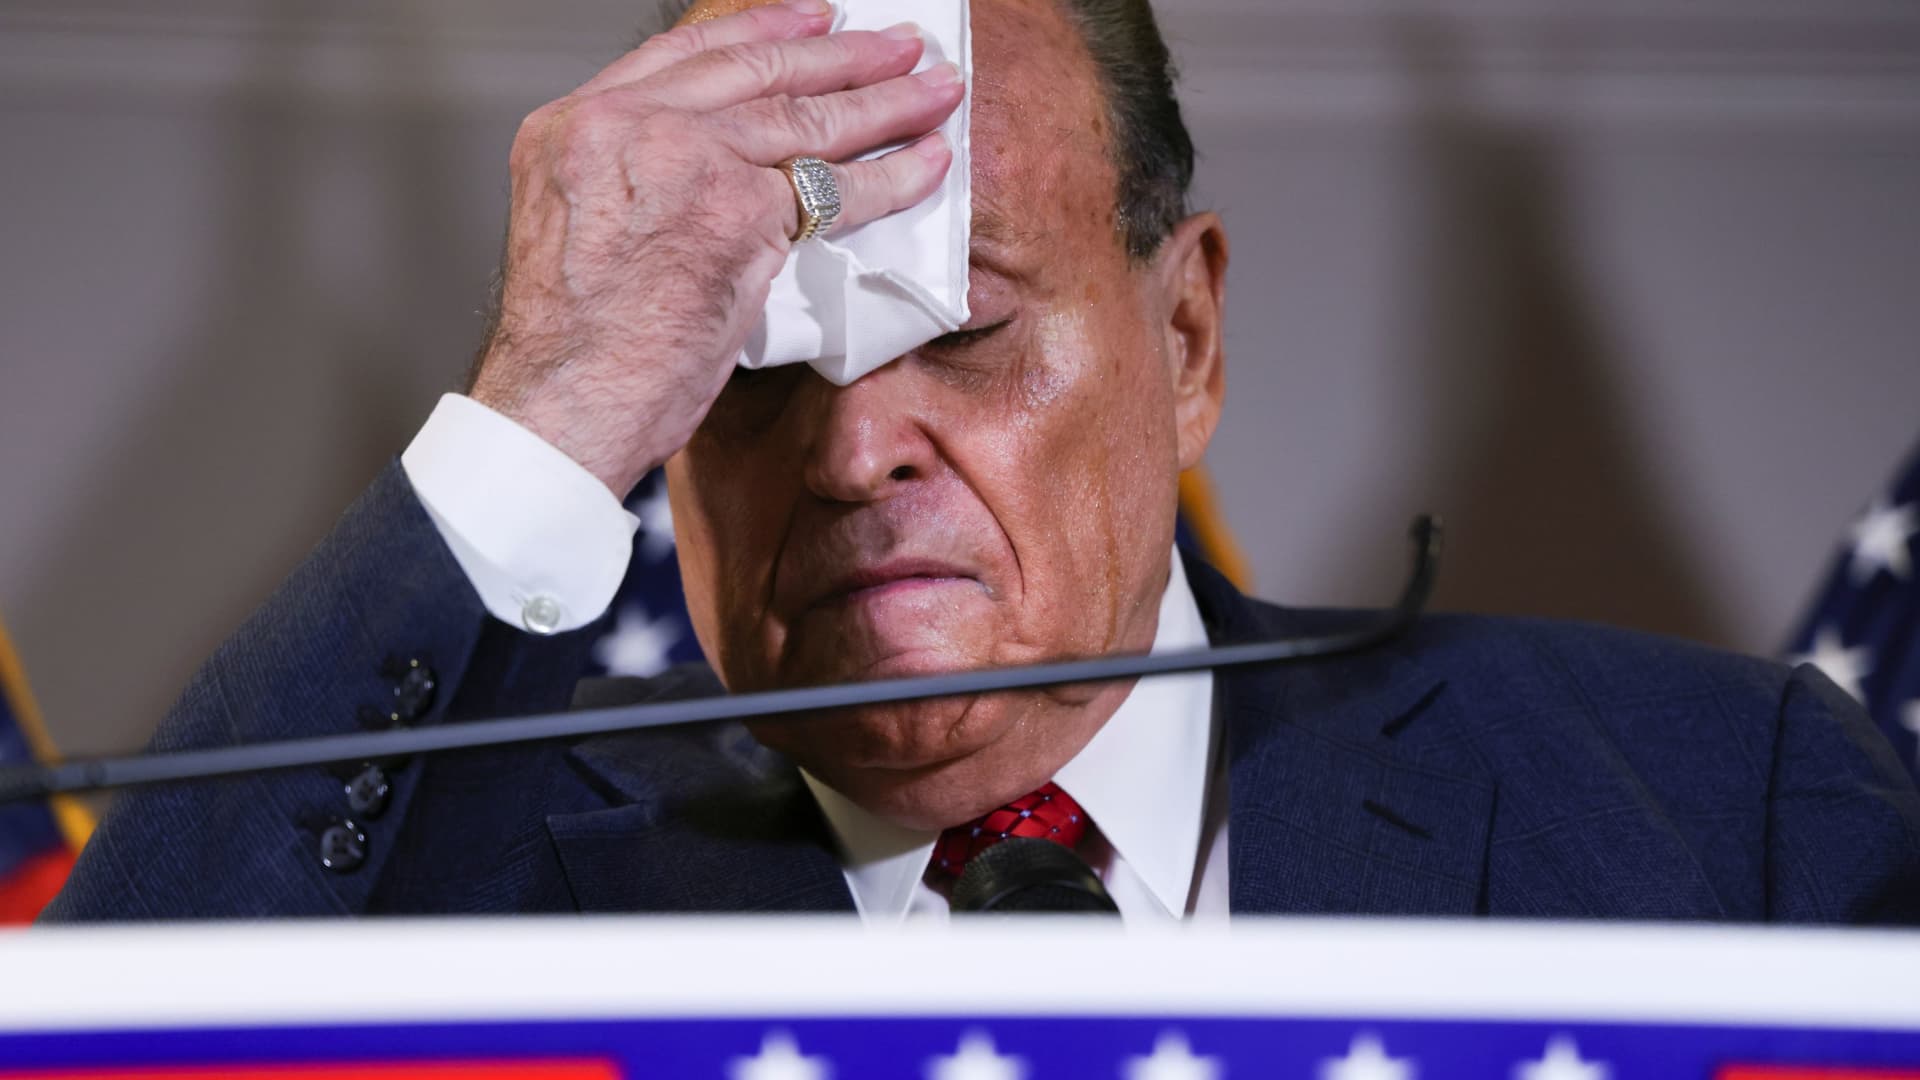 Former New York City Mayor Rudy Giuliani, personal attorney to U.S. President Donald Trump, wipes sweat from his face during a news conference about the 2020 U.S. presidential election results at Republican National Committee headquarters in Washington, U.S., November 19, 2020.